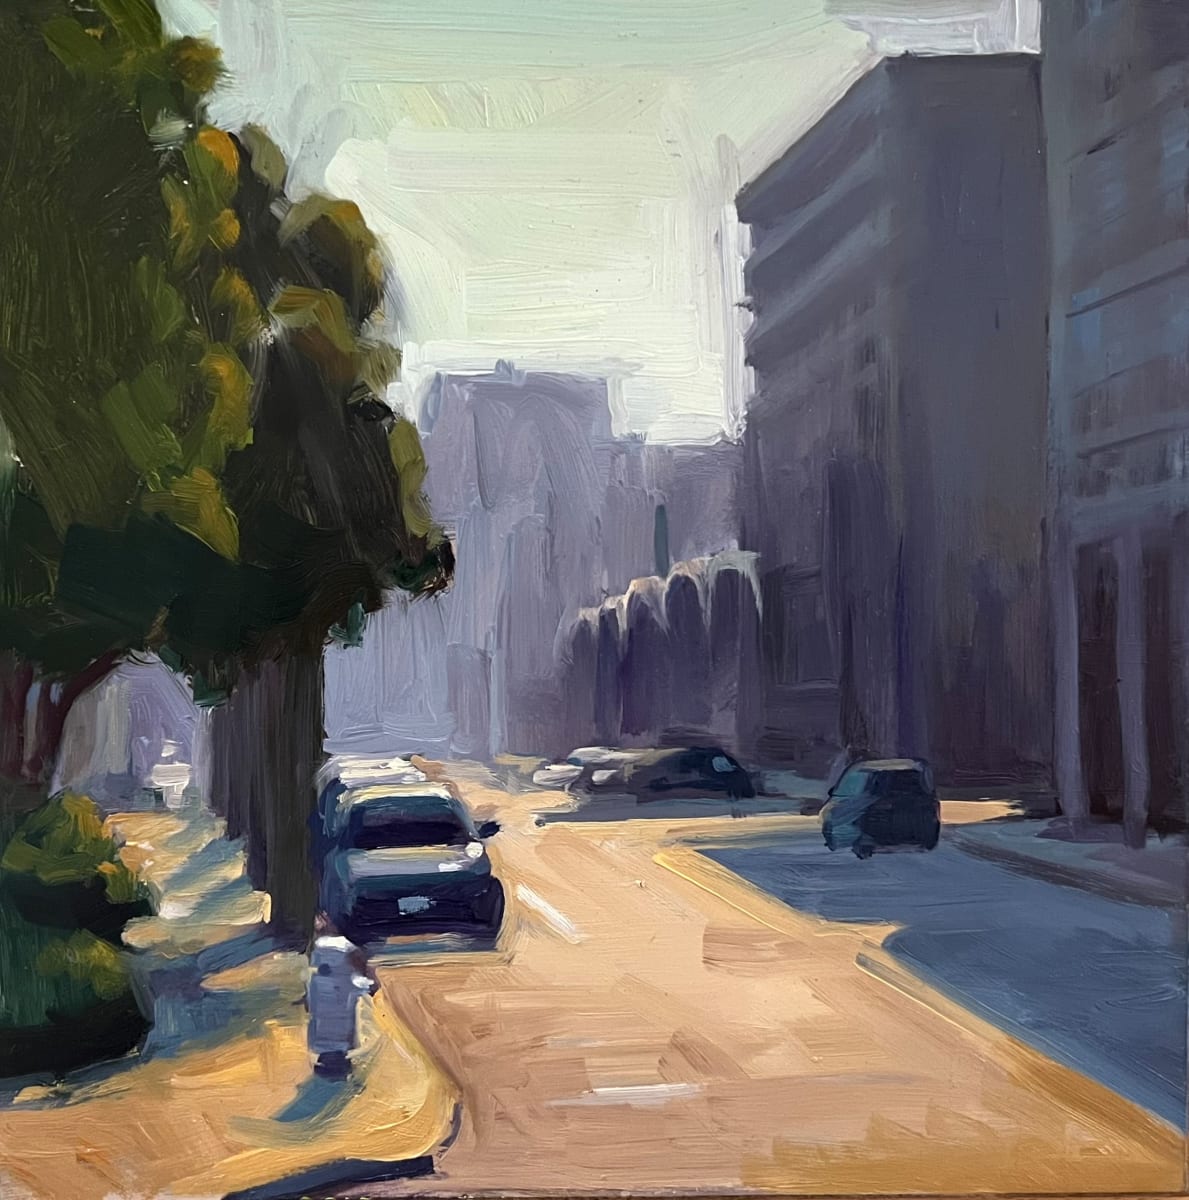 Morning Light on the Oakland Streets by Erica Norelius 